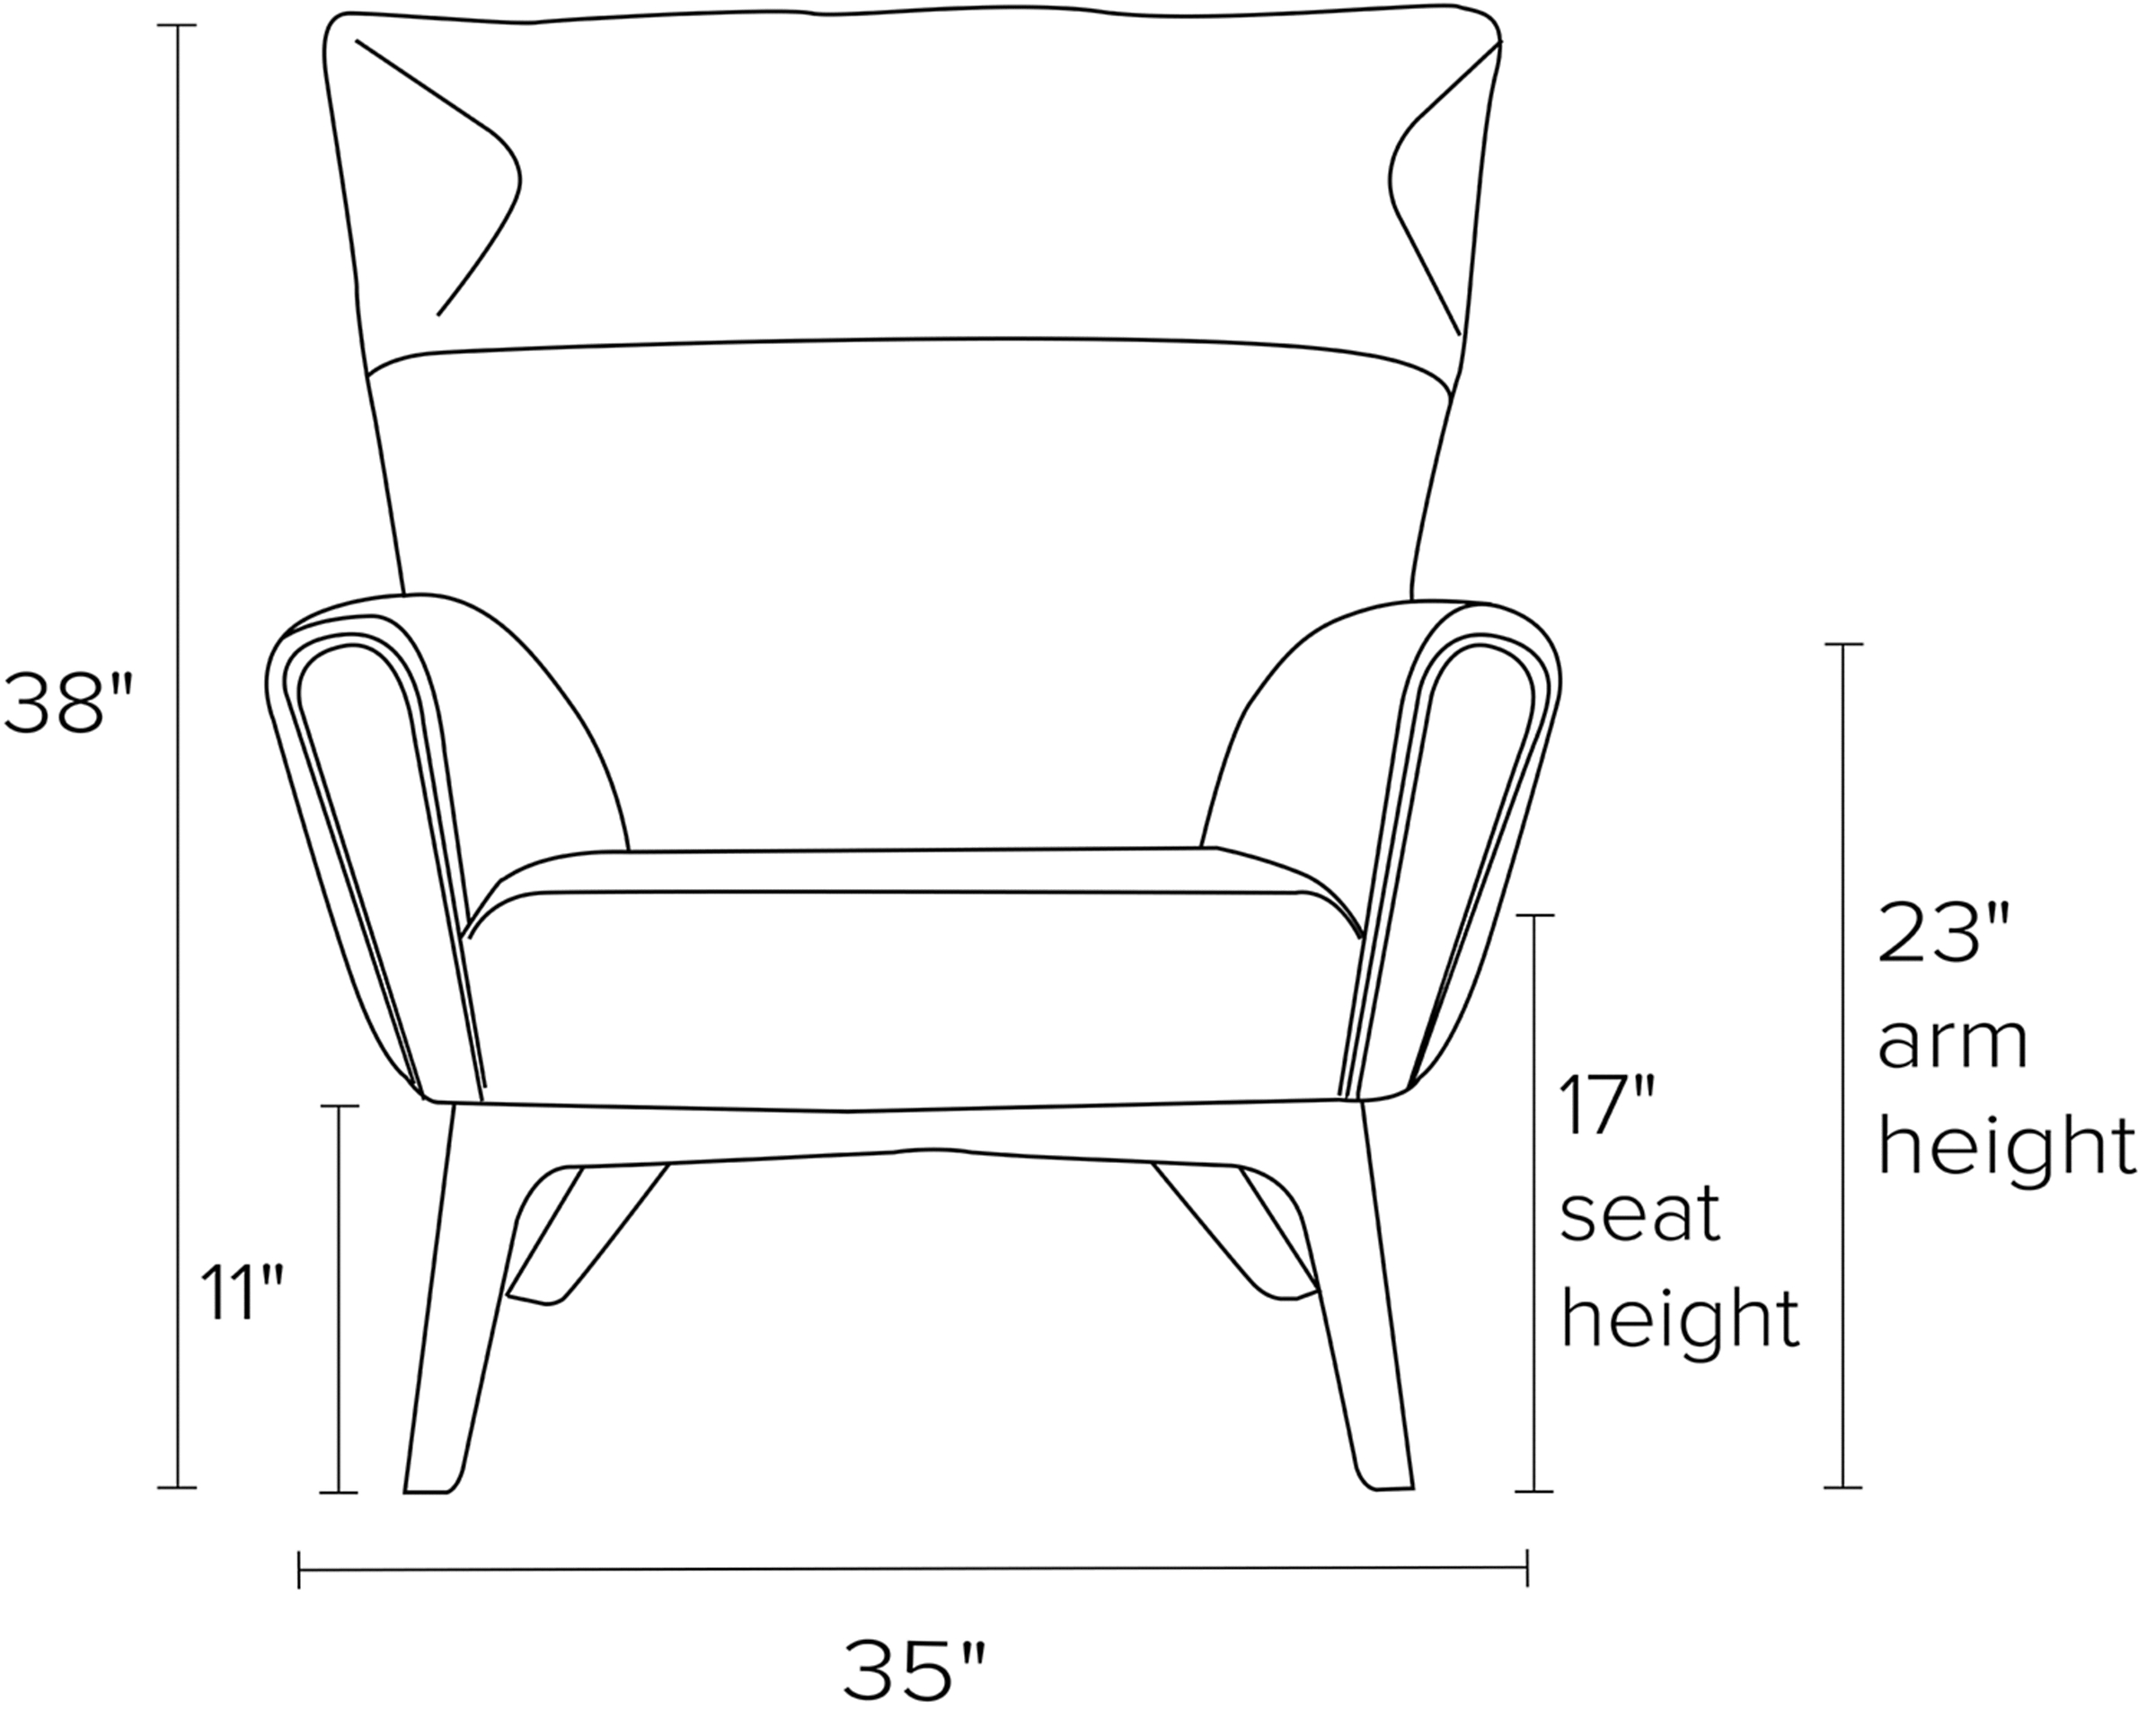 Front view dimension illustration of Boden chair.